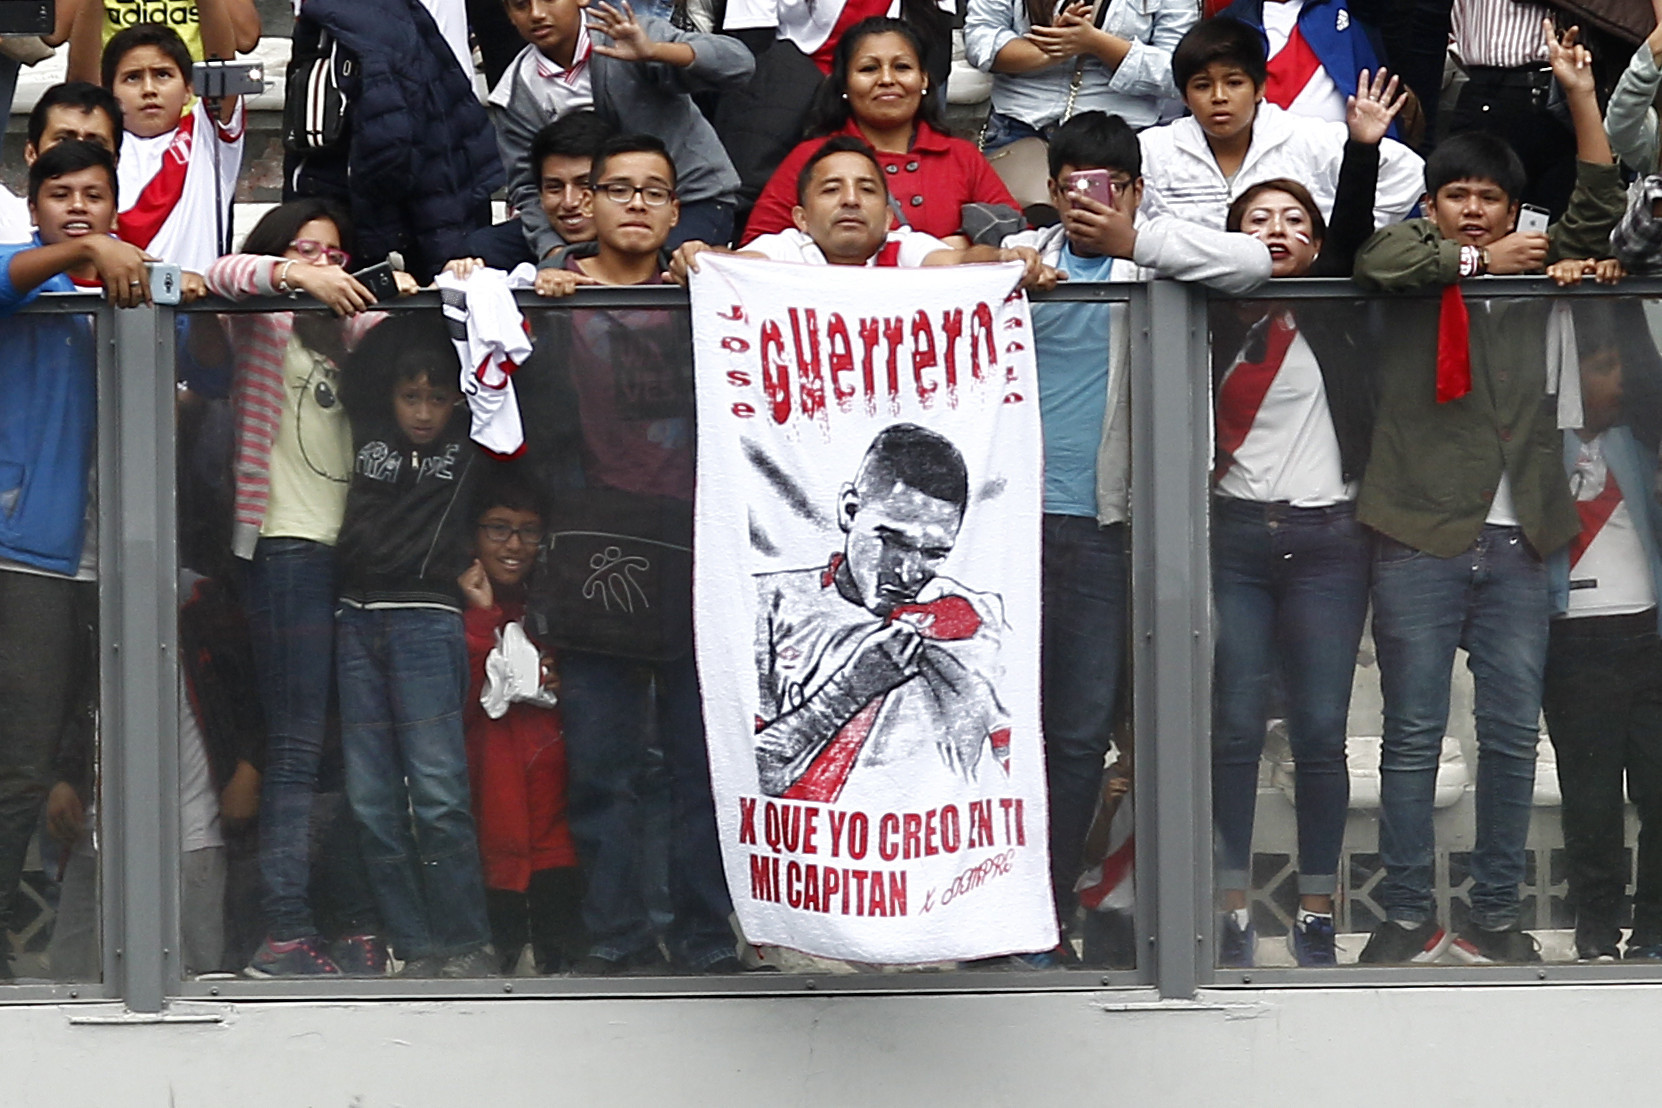 Fans attending an open training session in Lima last week displayed banners in support of Paolo Guerrero ©Getty Images